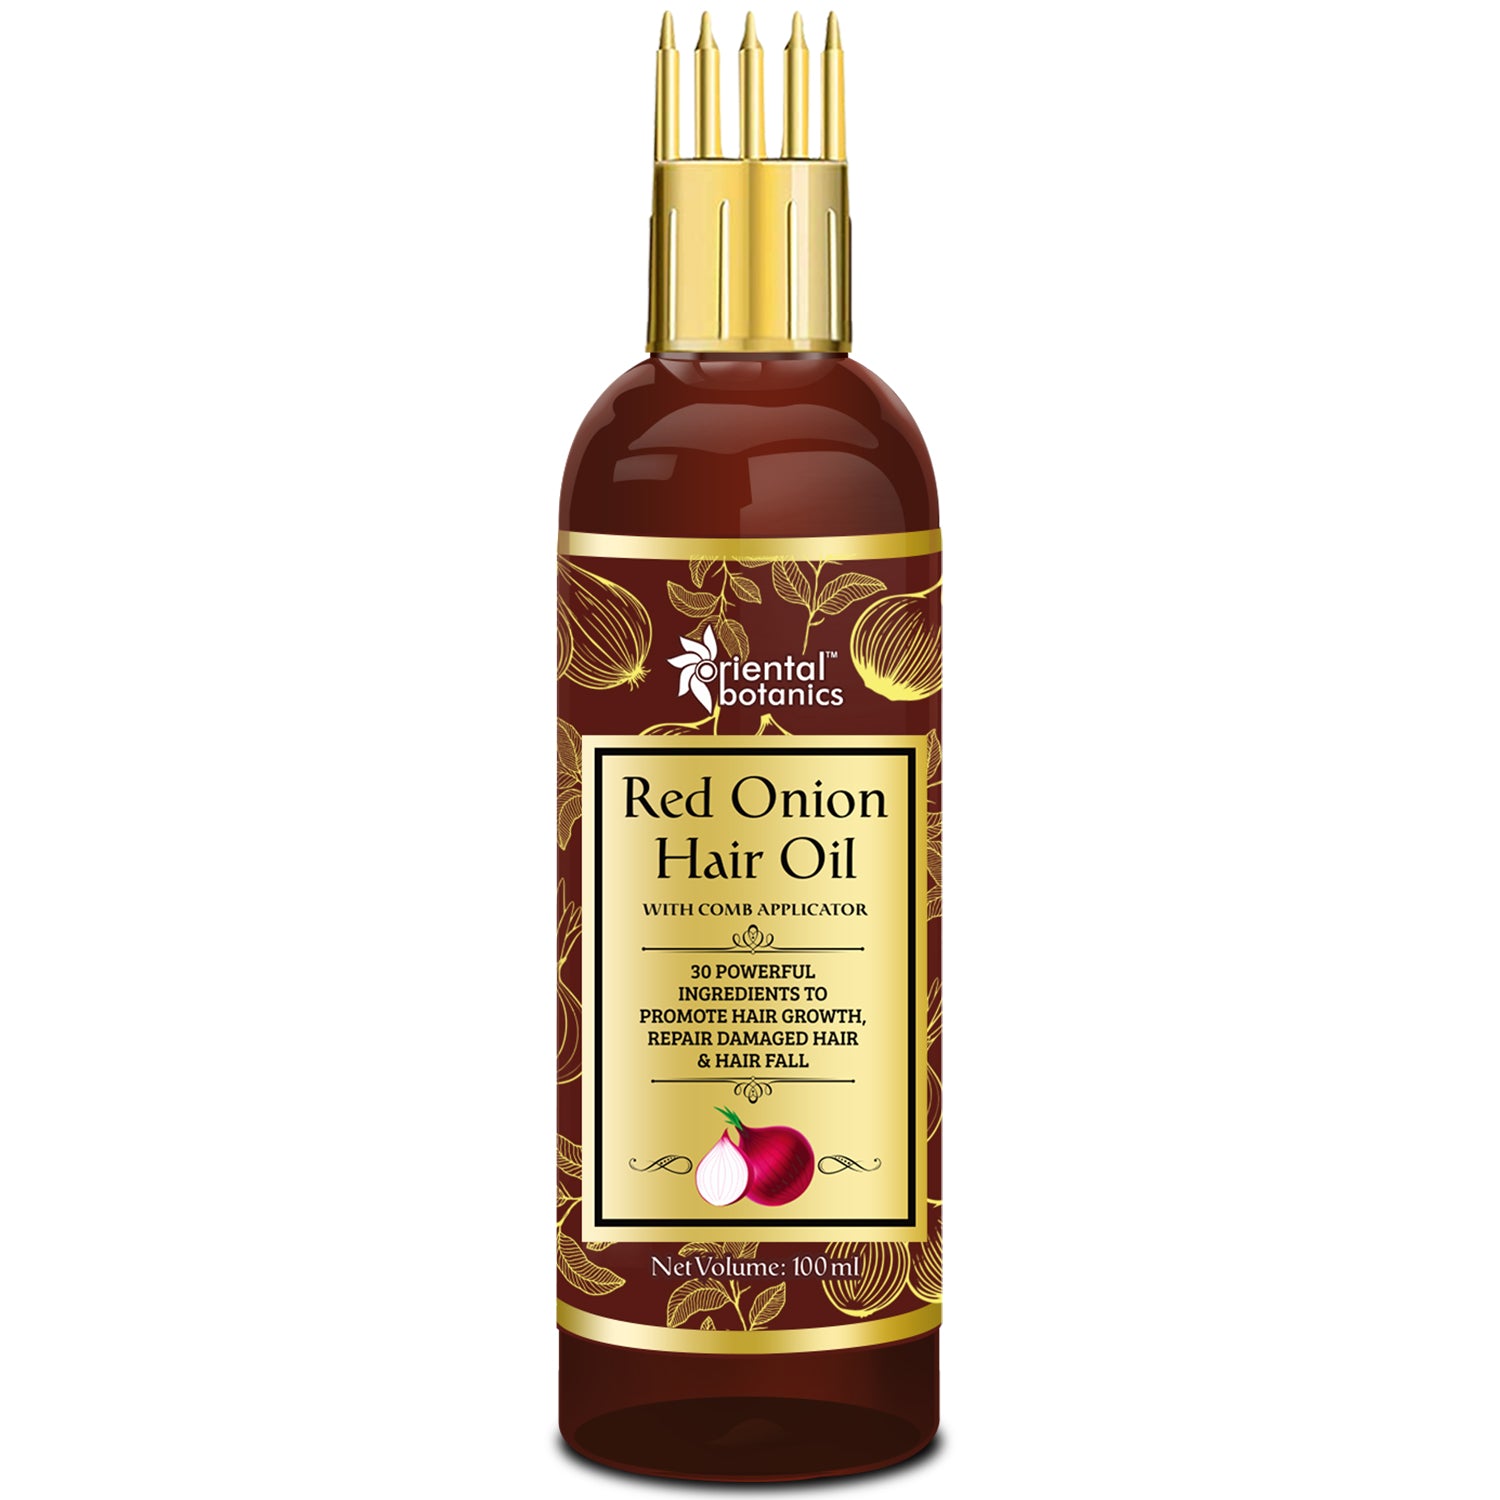 Oriental Botanics Red Onion Hair Oil With Comb Applicator - With 30 Oils & Extracts For Stronger Growth and To Control Hair Fall, 100 ml, 100ml + comb applicator